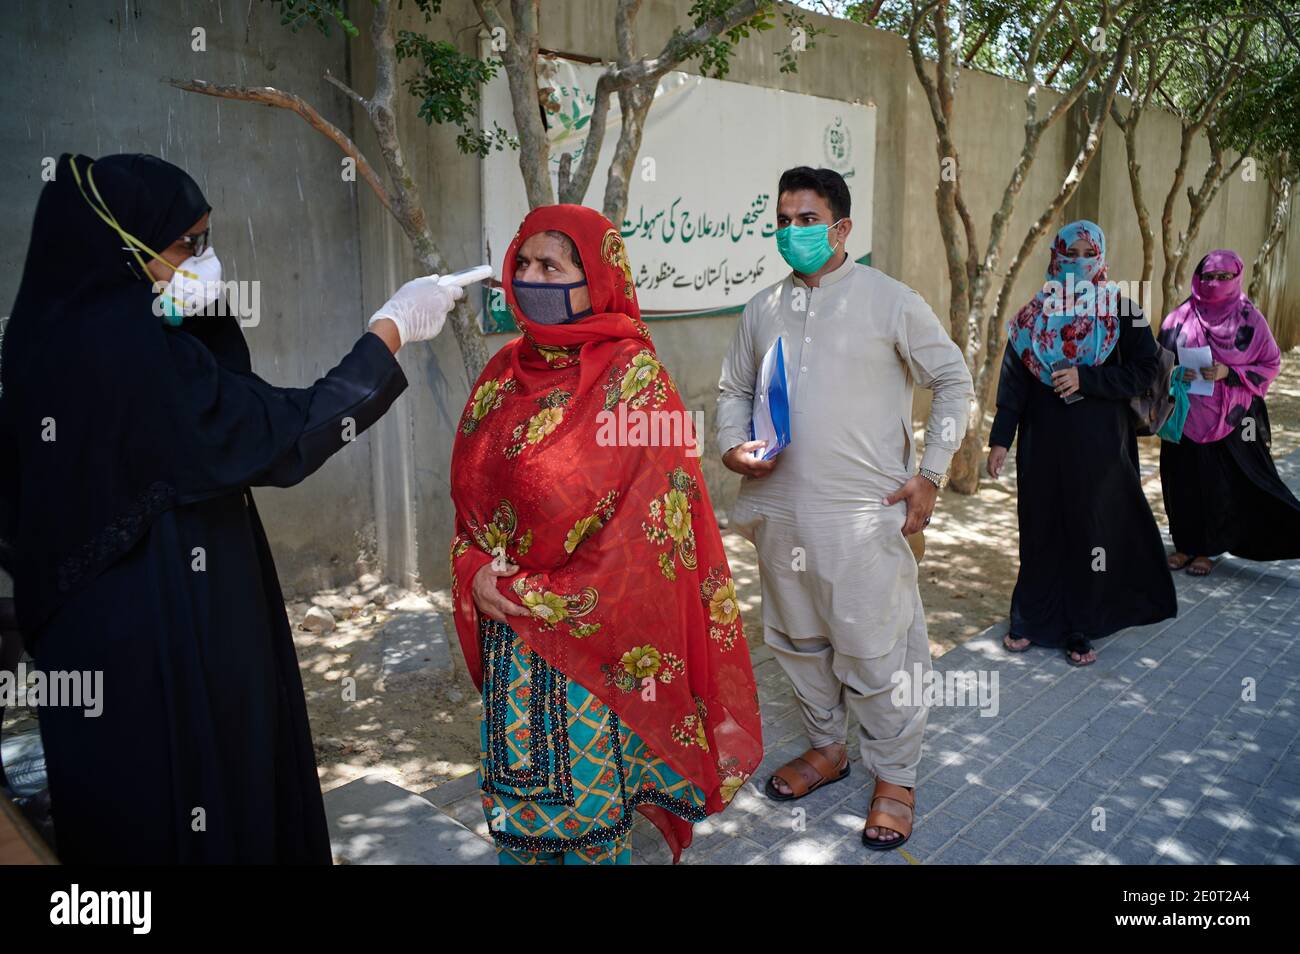 TB patients are being screened for coronavirus at the entrance to the Gori TB Clinic at the Indus Hospital in Korangi, Karachi, Pakistan. Stock Photo